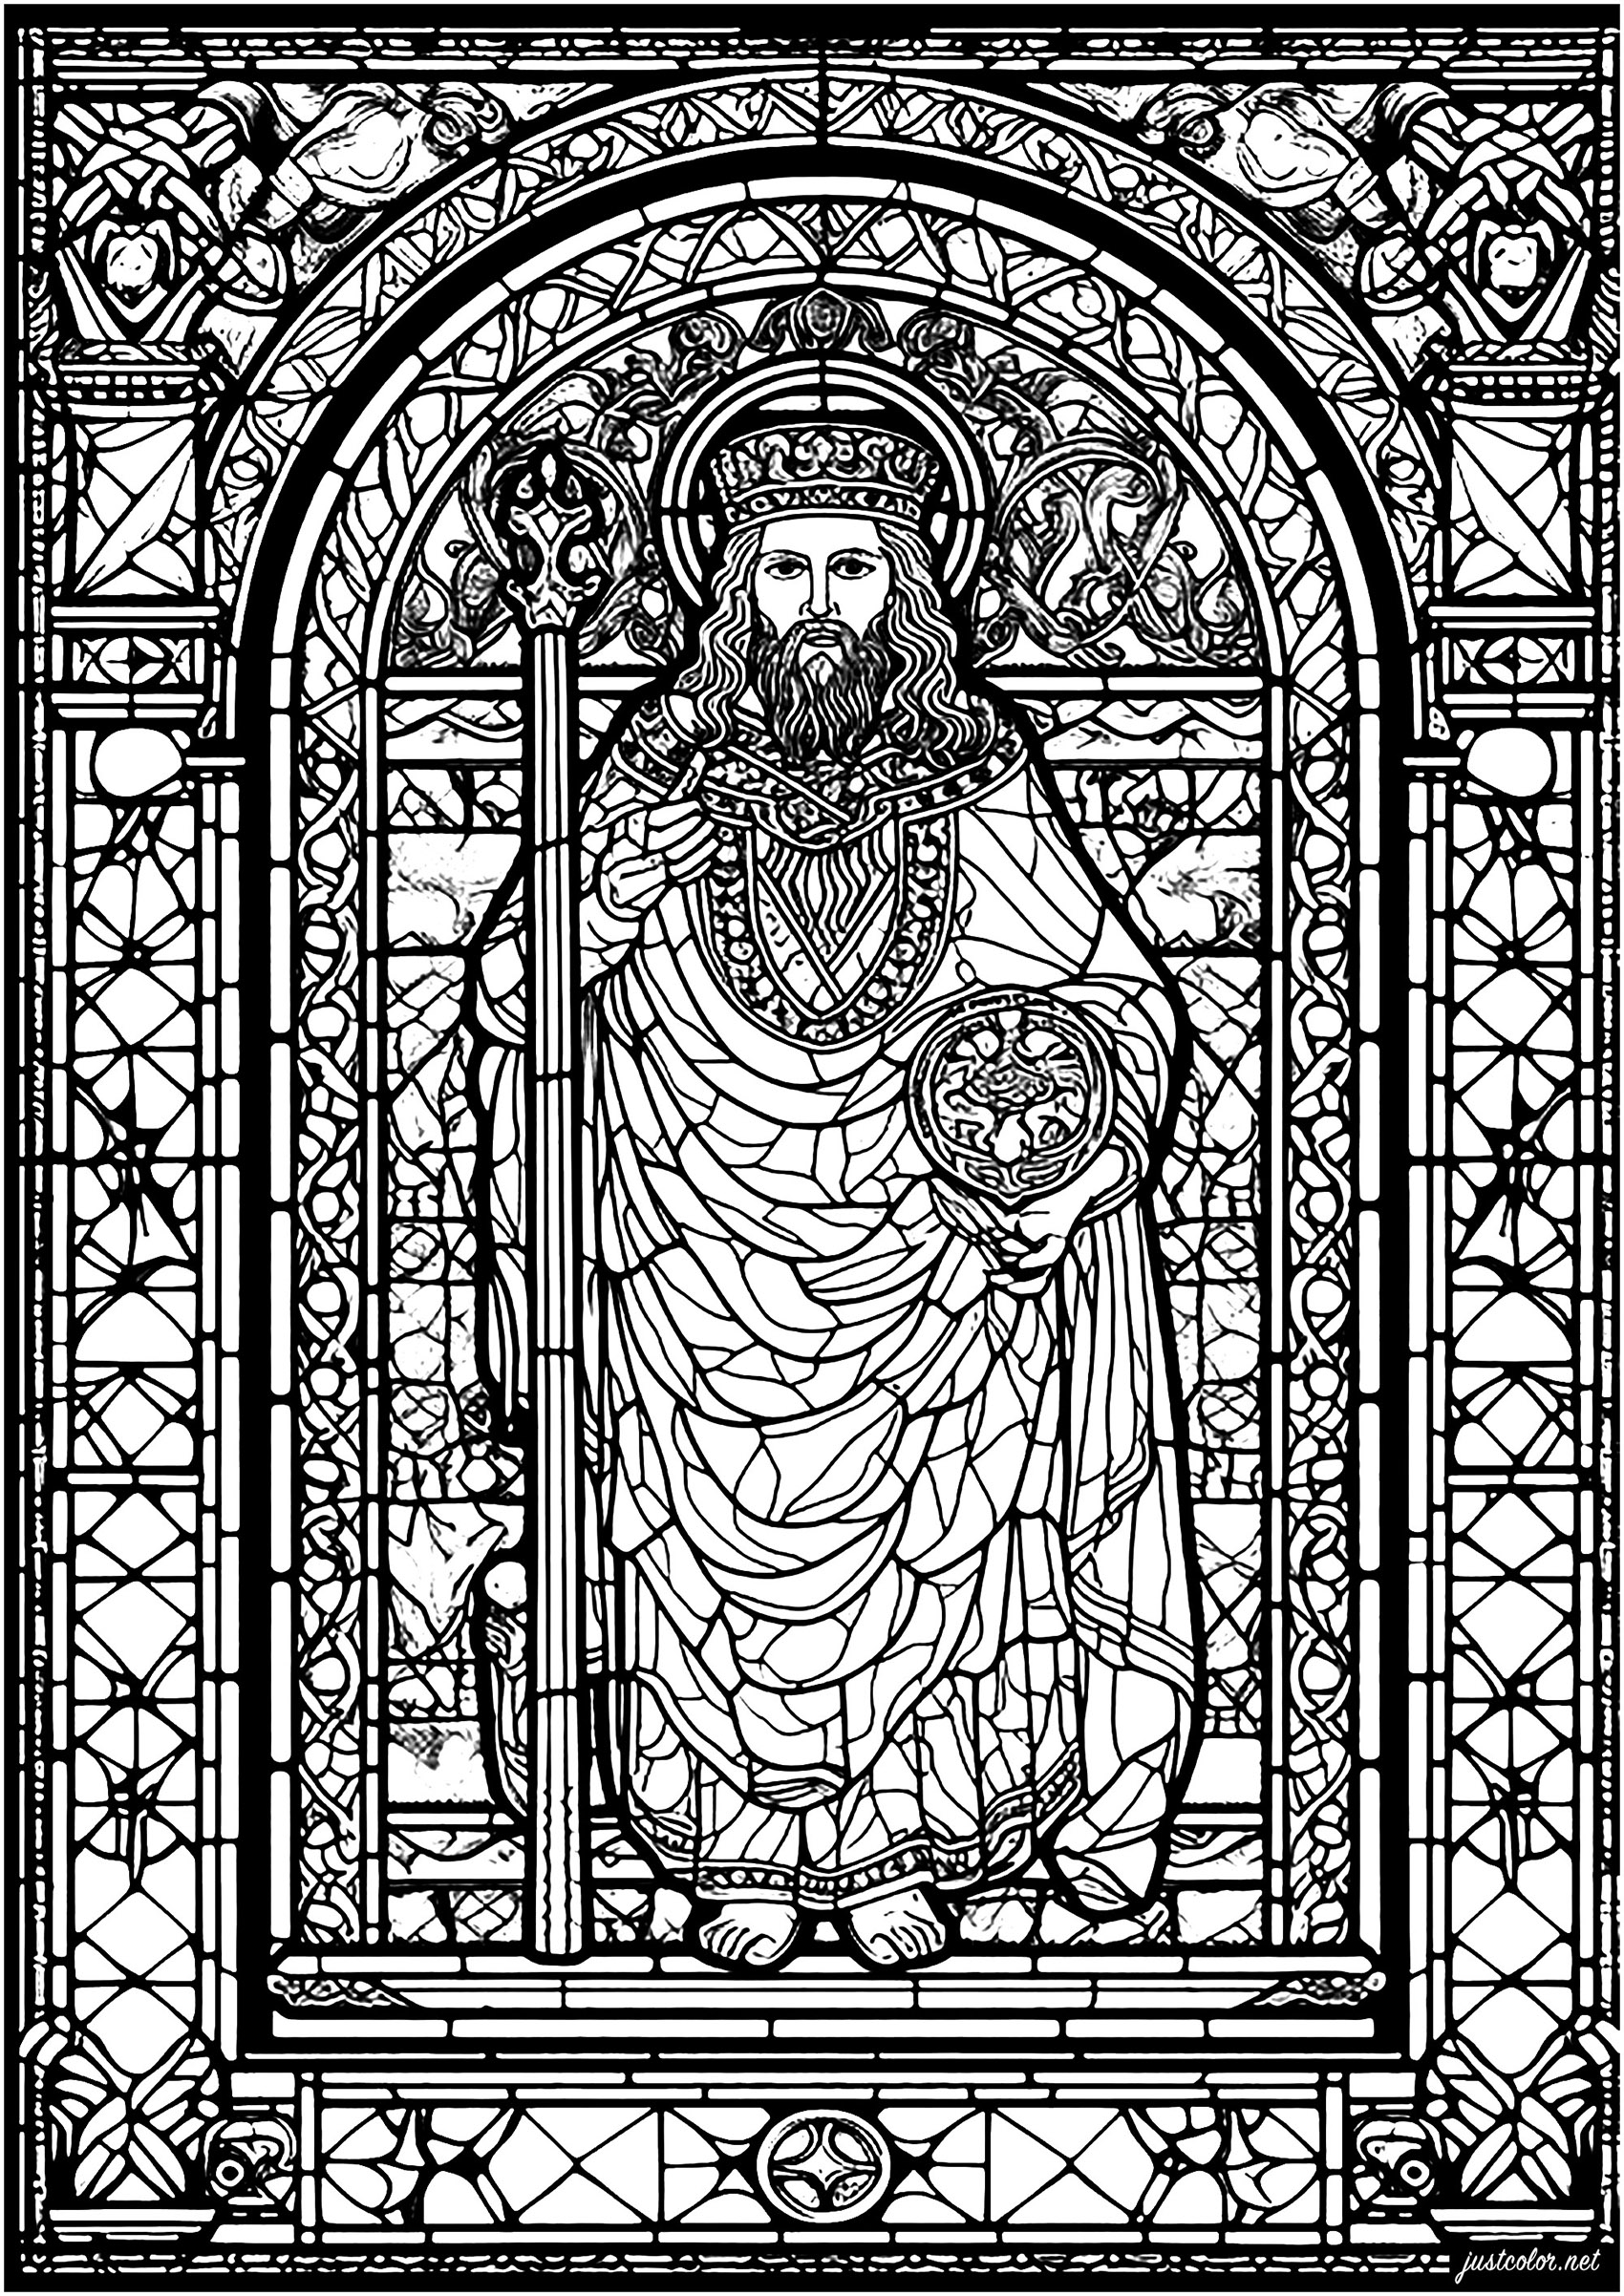 Stained glass window depicting an imaginary king. A coloring page of great complexity: lots of details to color!